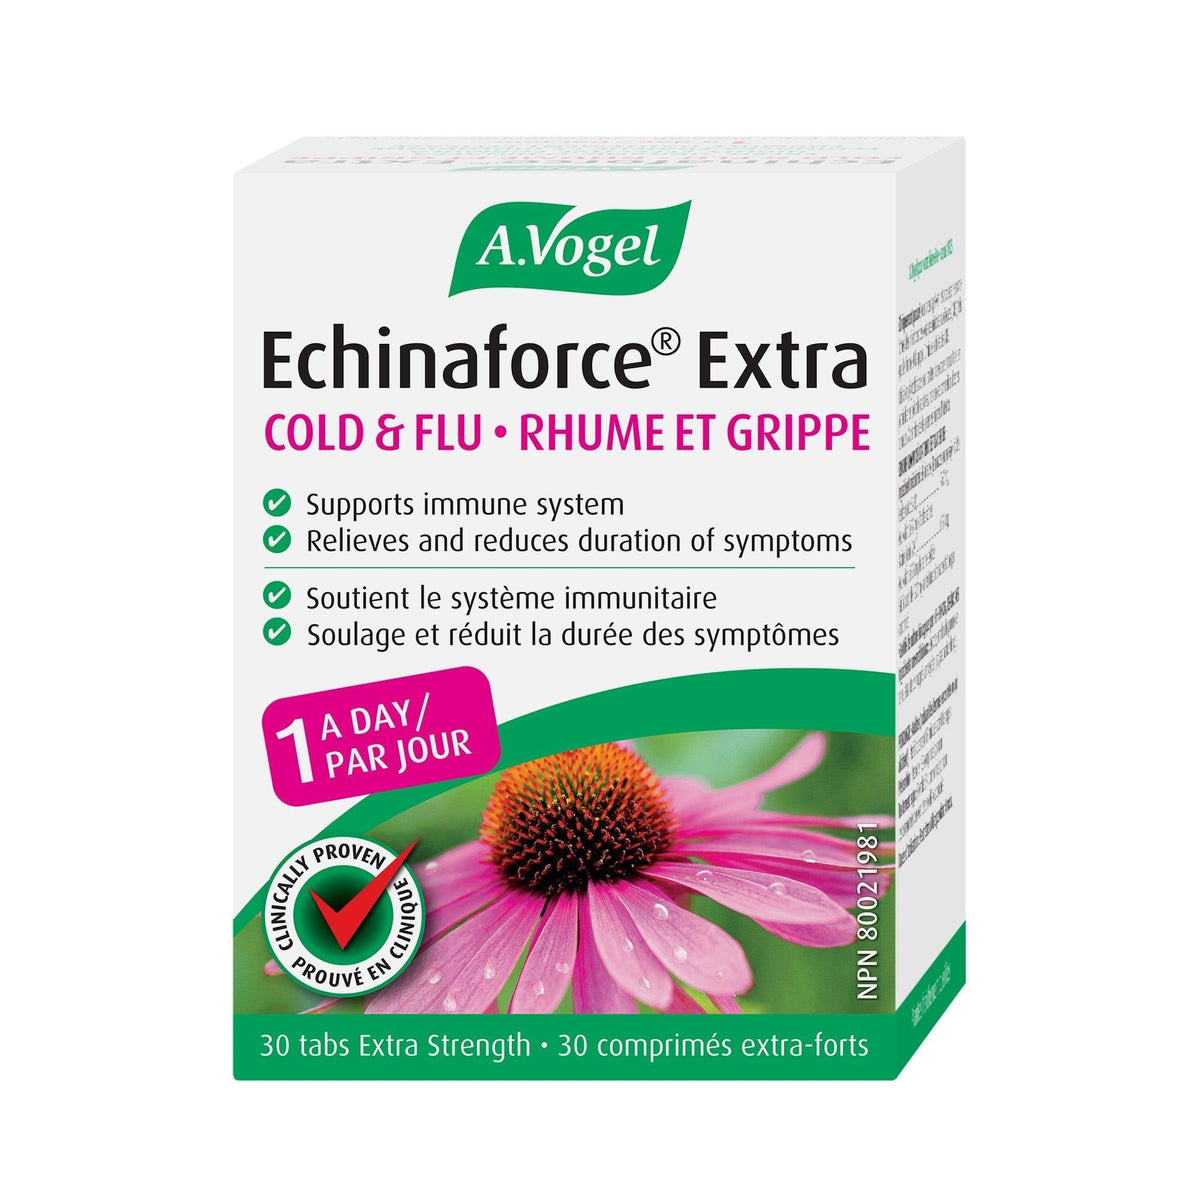 A.Vogel Echinaforce Extra Strength 30 Tabs Cough, Cold & Flu at Village Vitamin Store